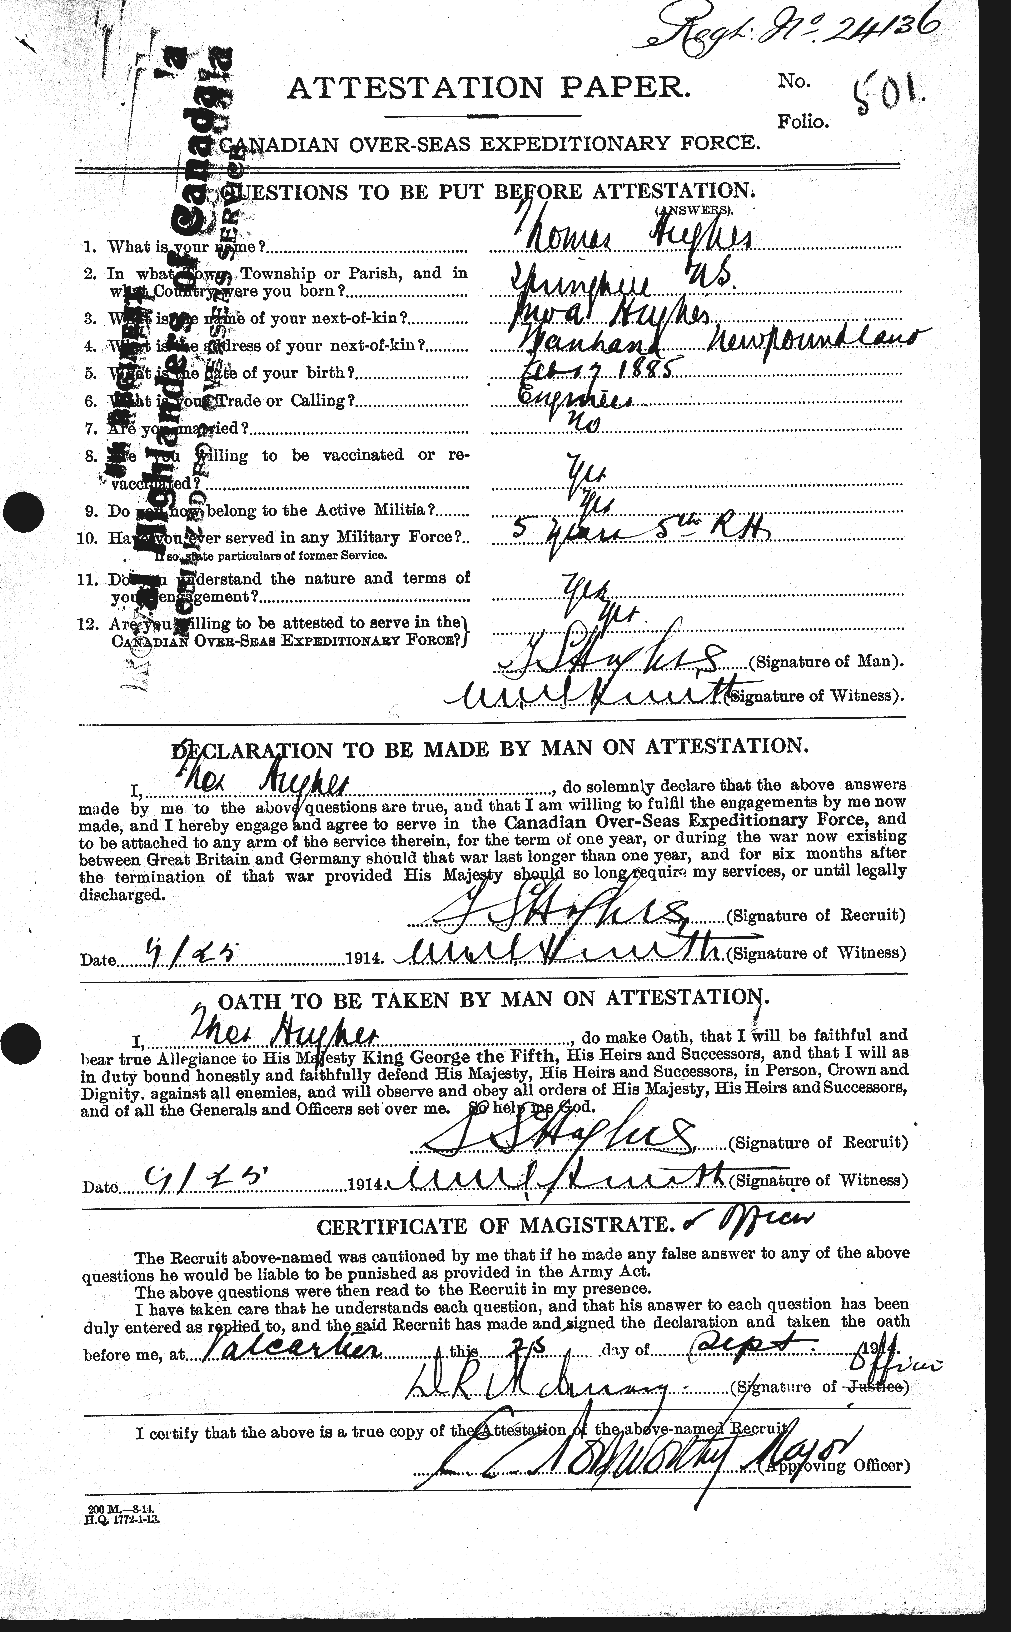 Personnel Records of the First World War - CEF 406664a